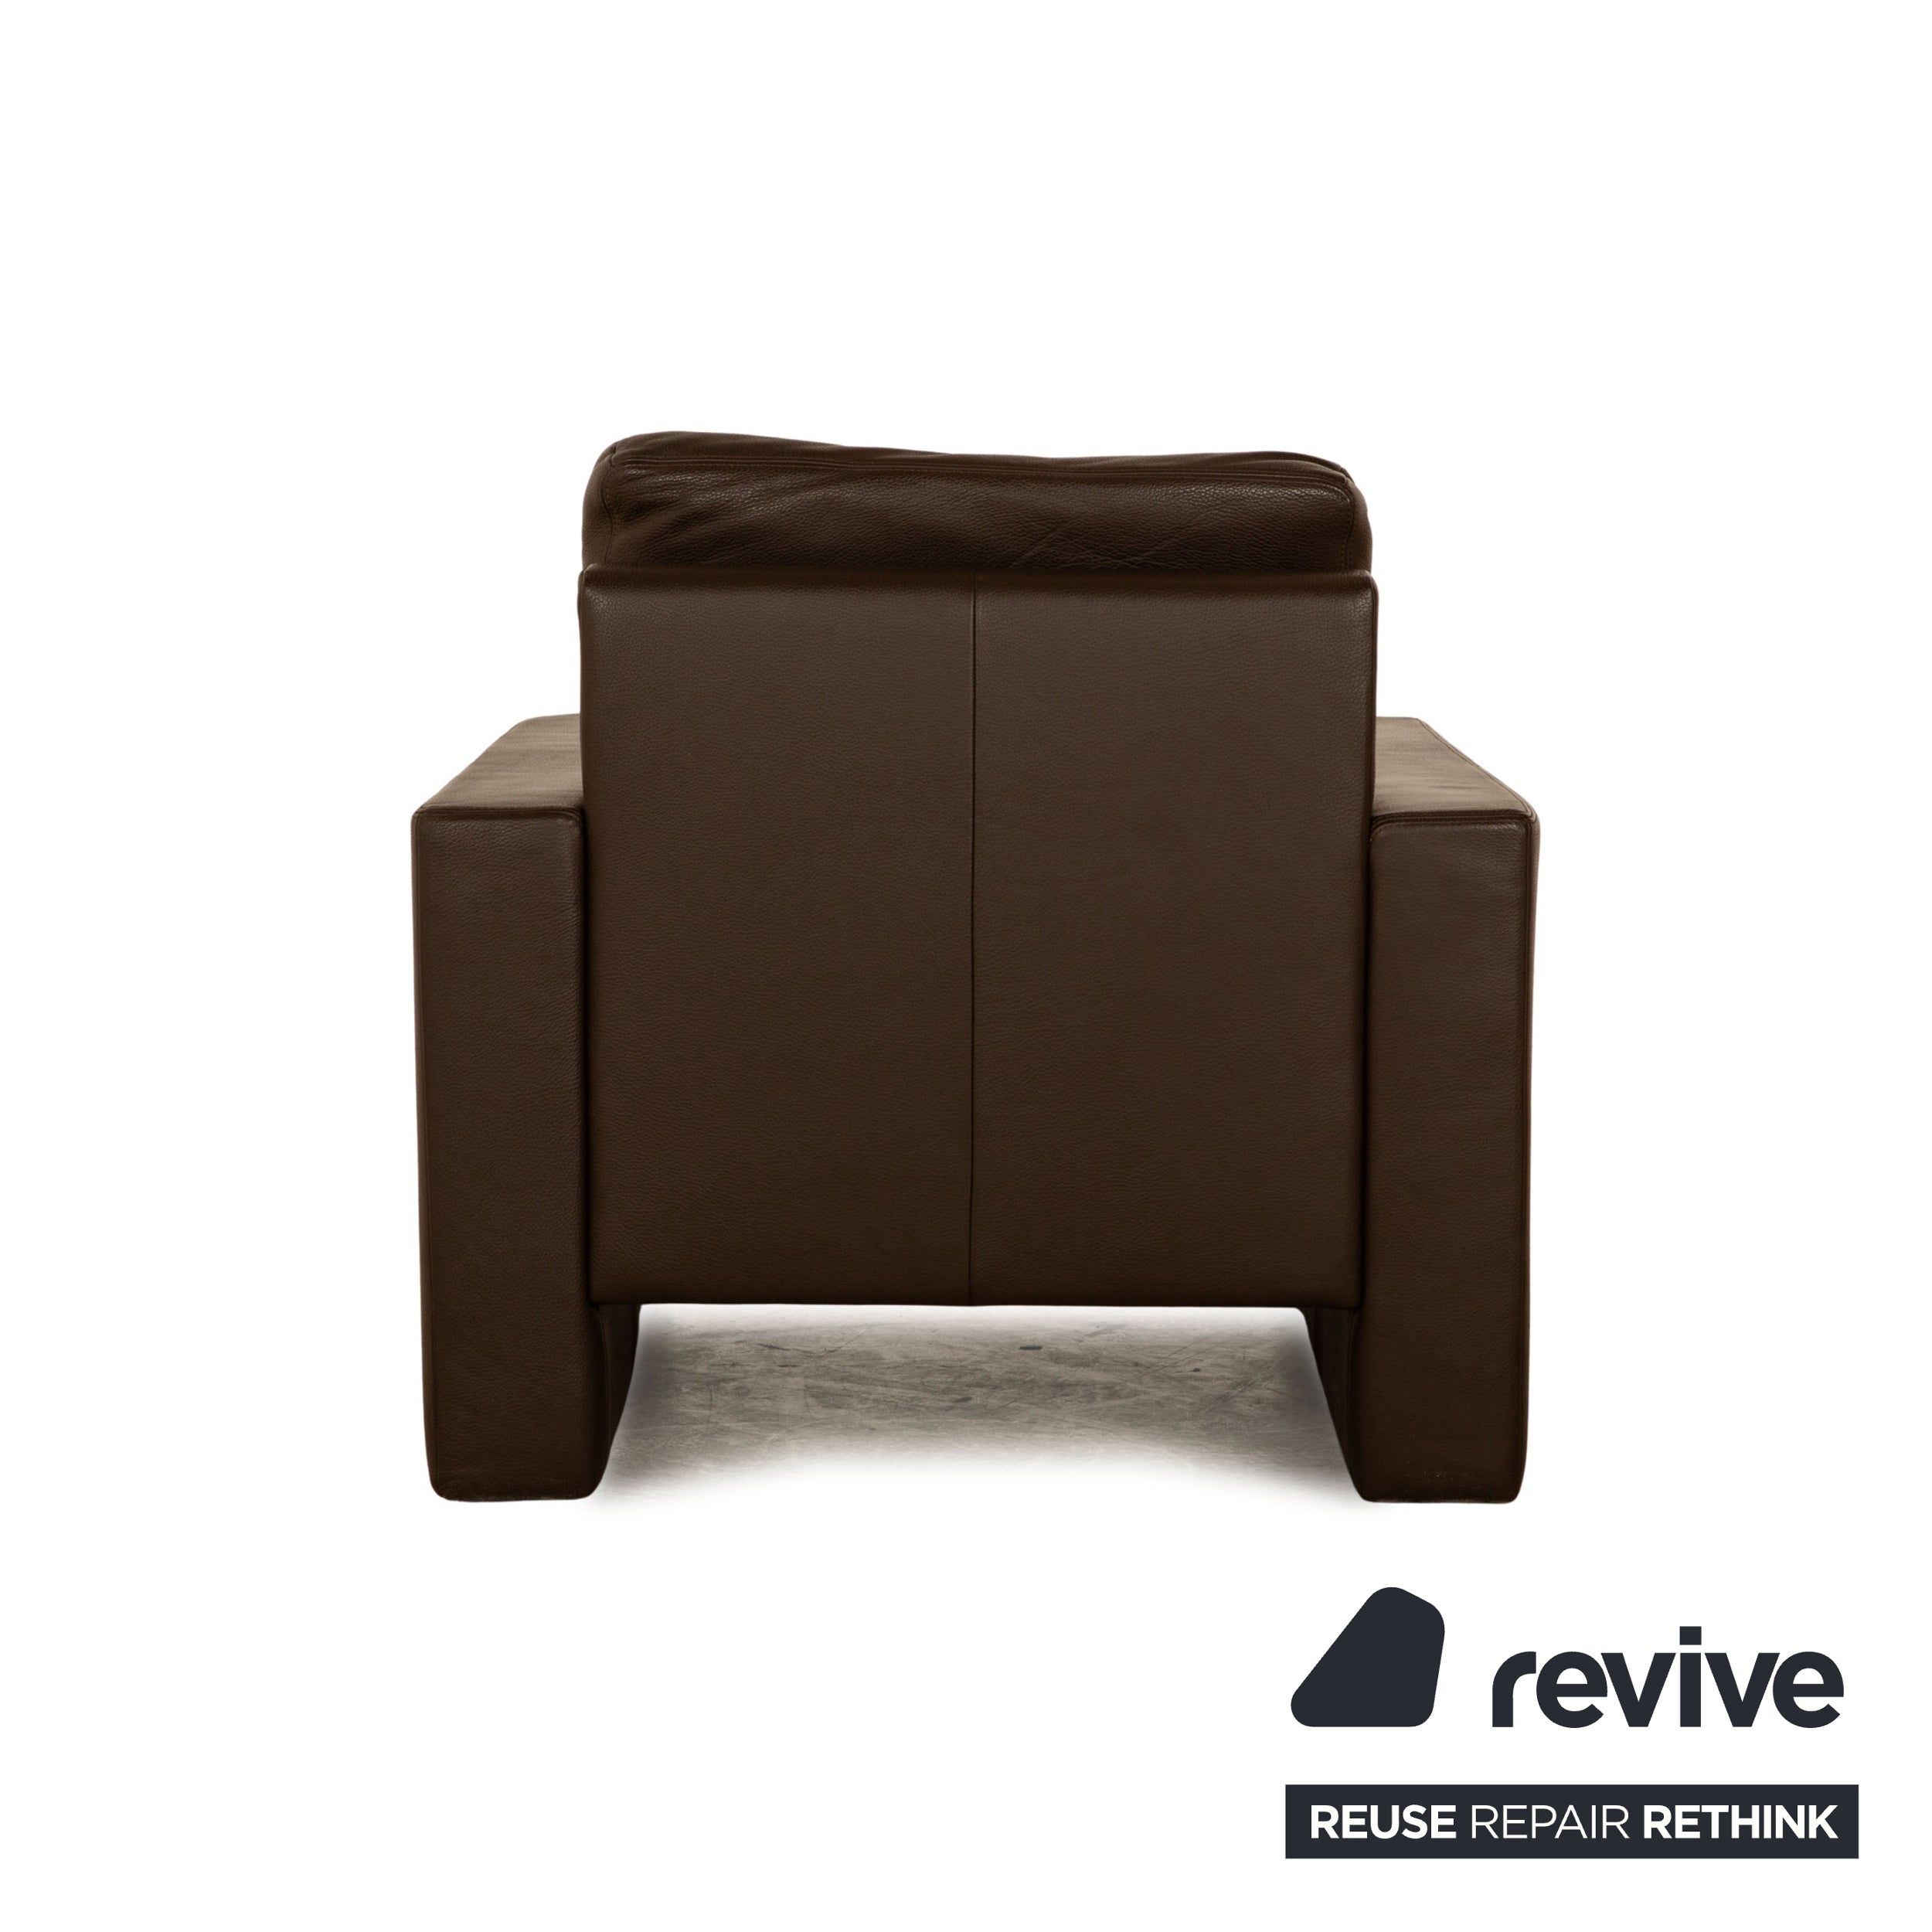 Erpo Leather Armchair Brown Club